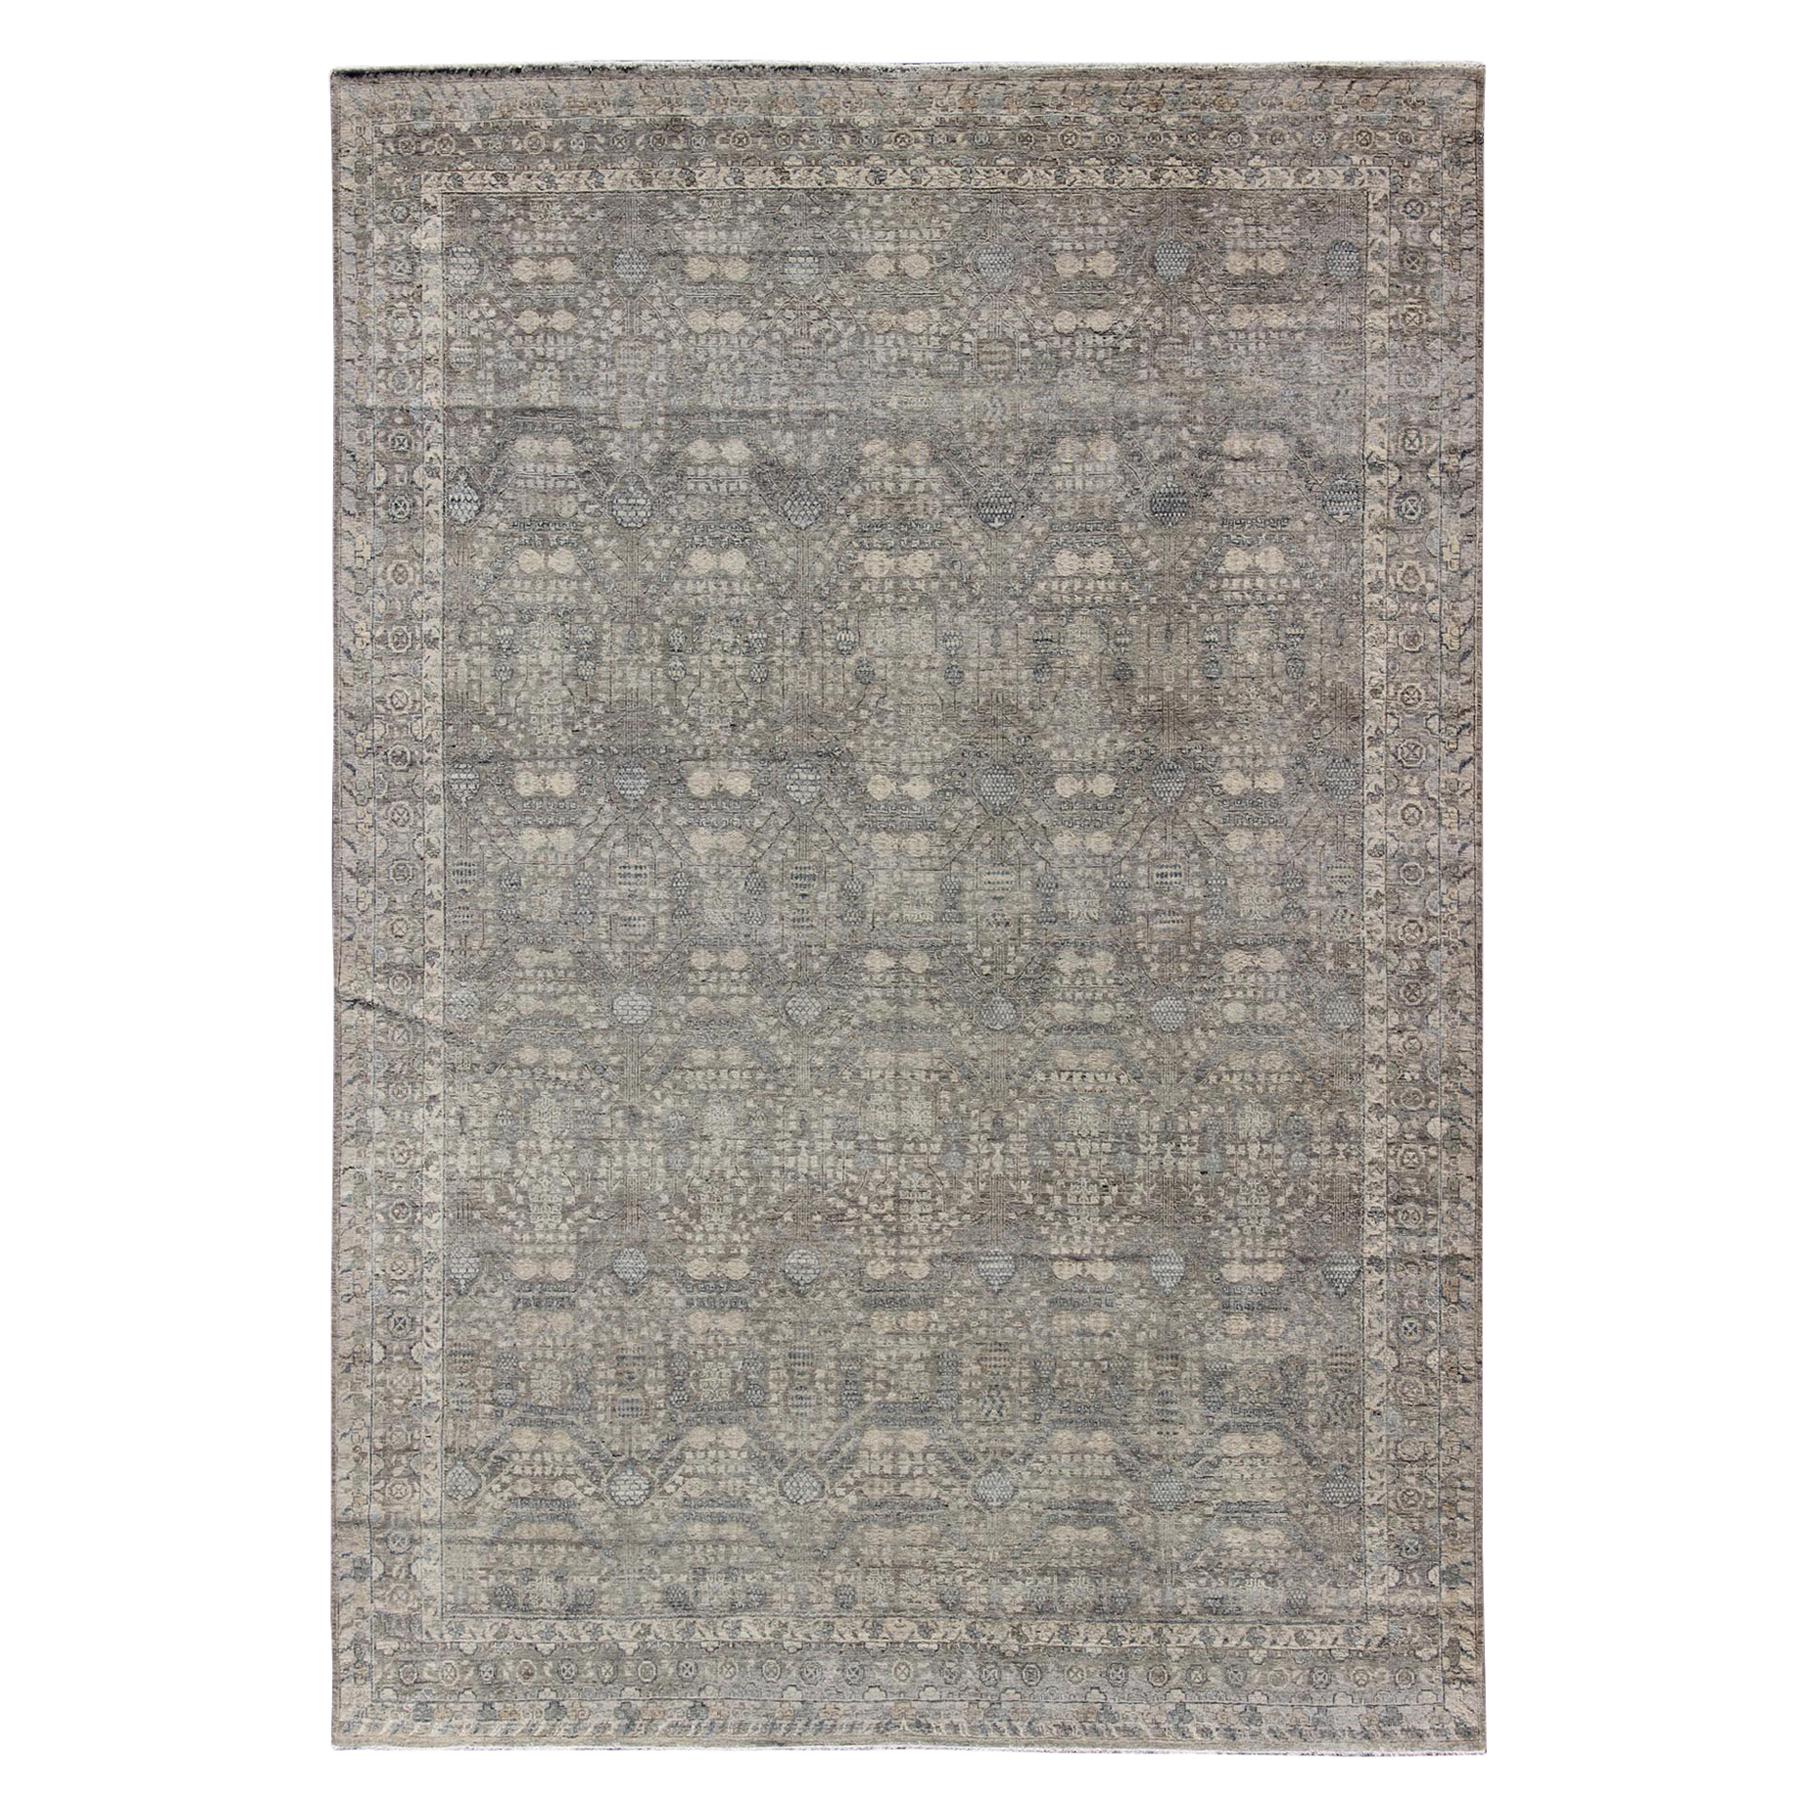 Modern Fine Weave Distressed Tabriz Rug in Taupe, Gray, Blue and Neutral Tones  For Sale